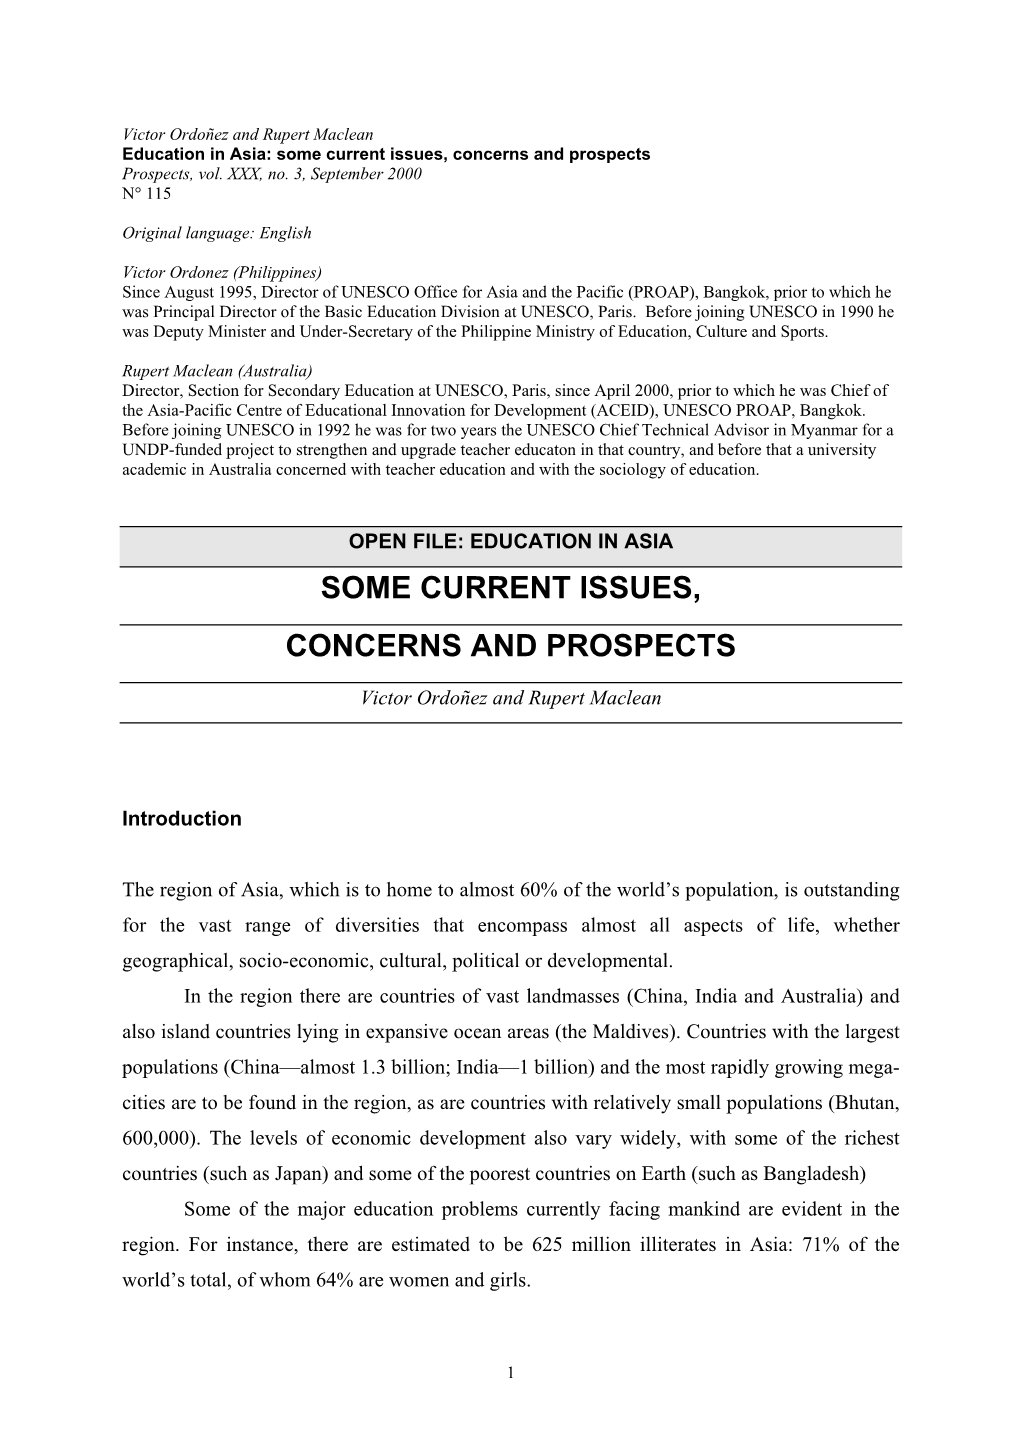 Education in Asia: Some Current Issues, Concerns and Prospects Prospects, Vol